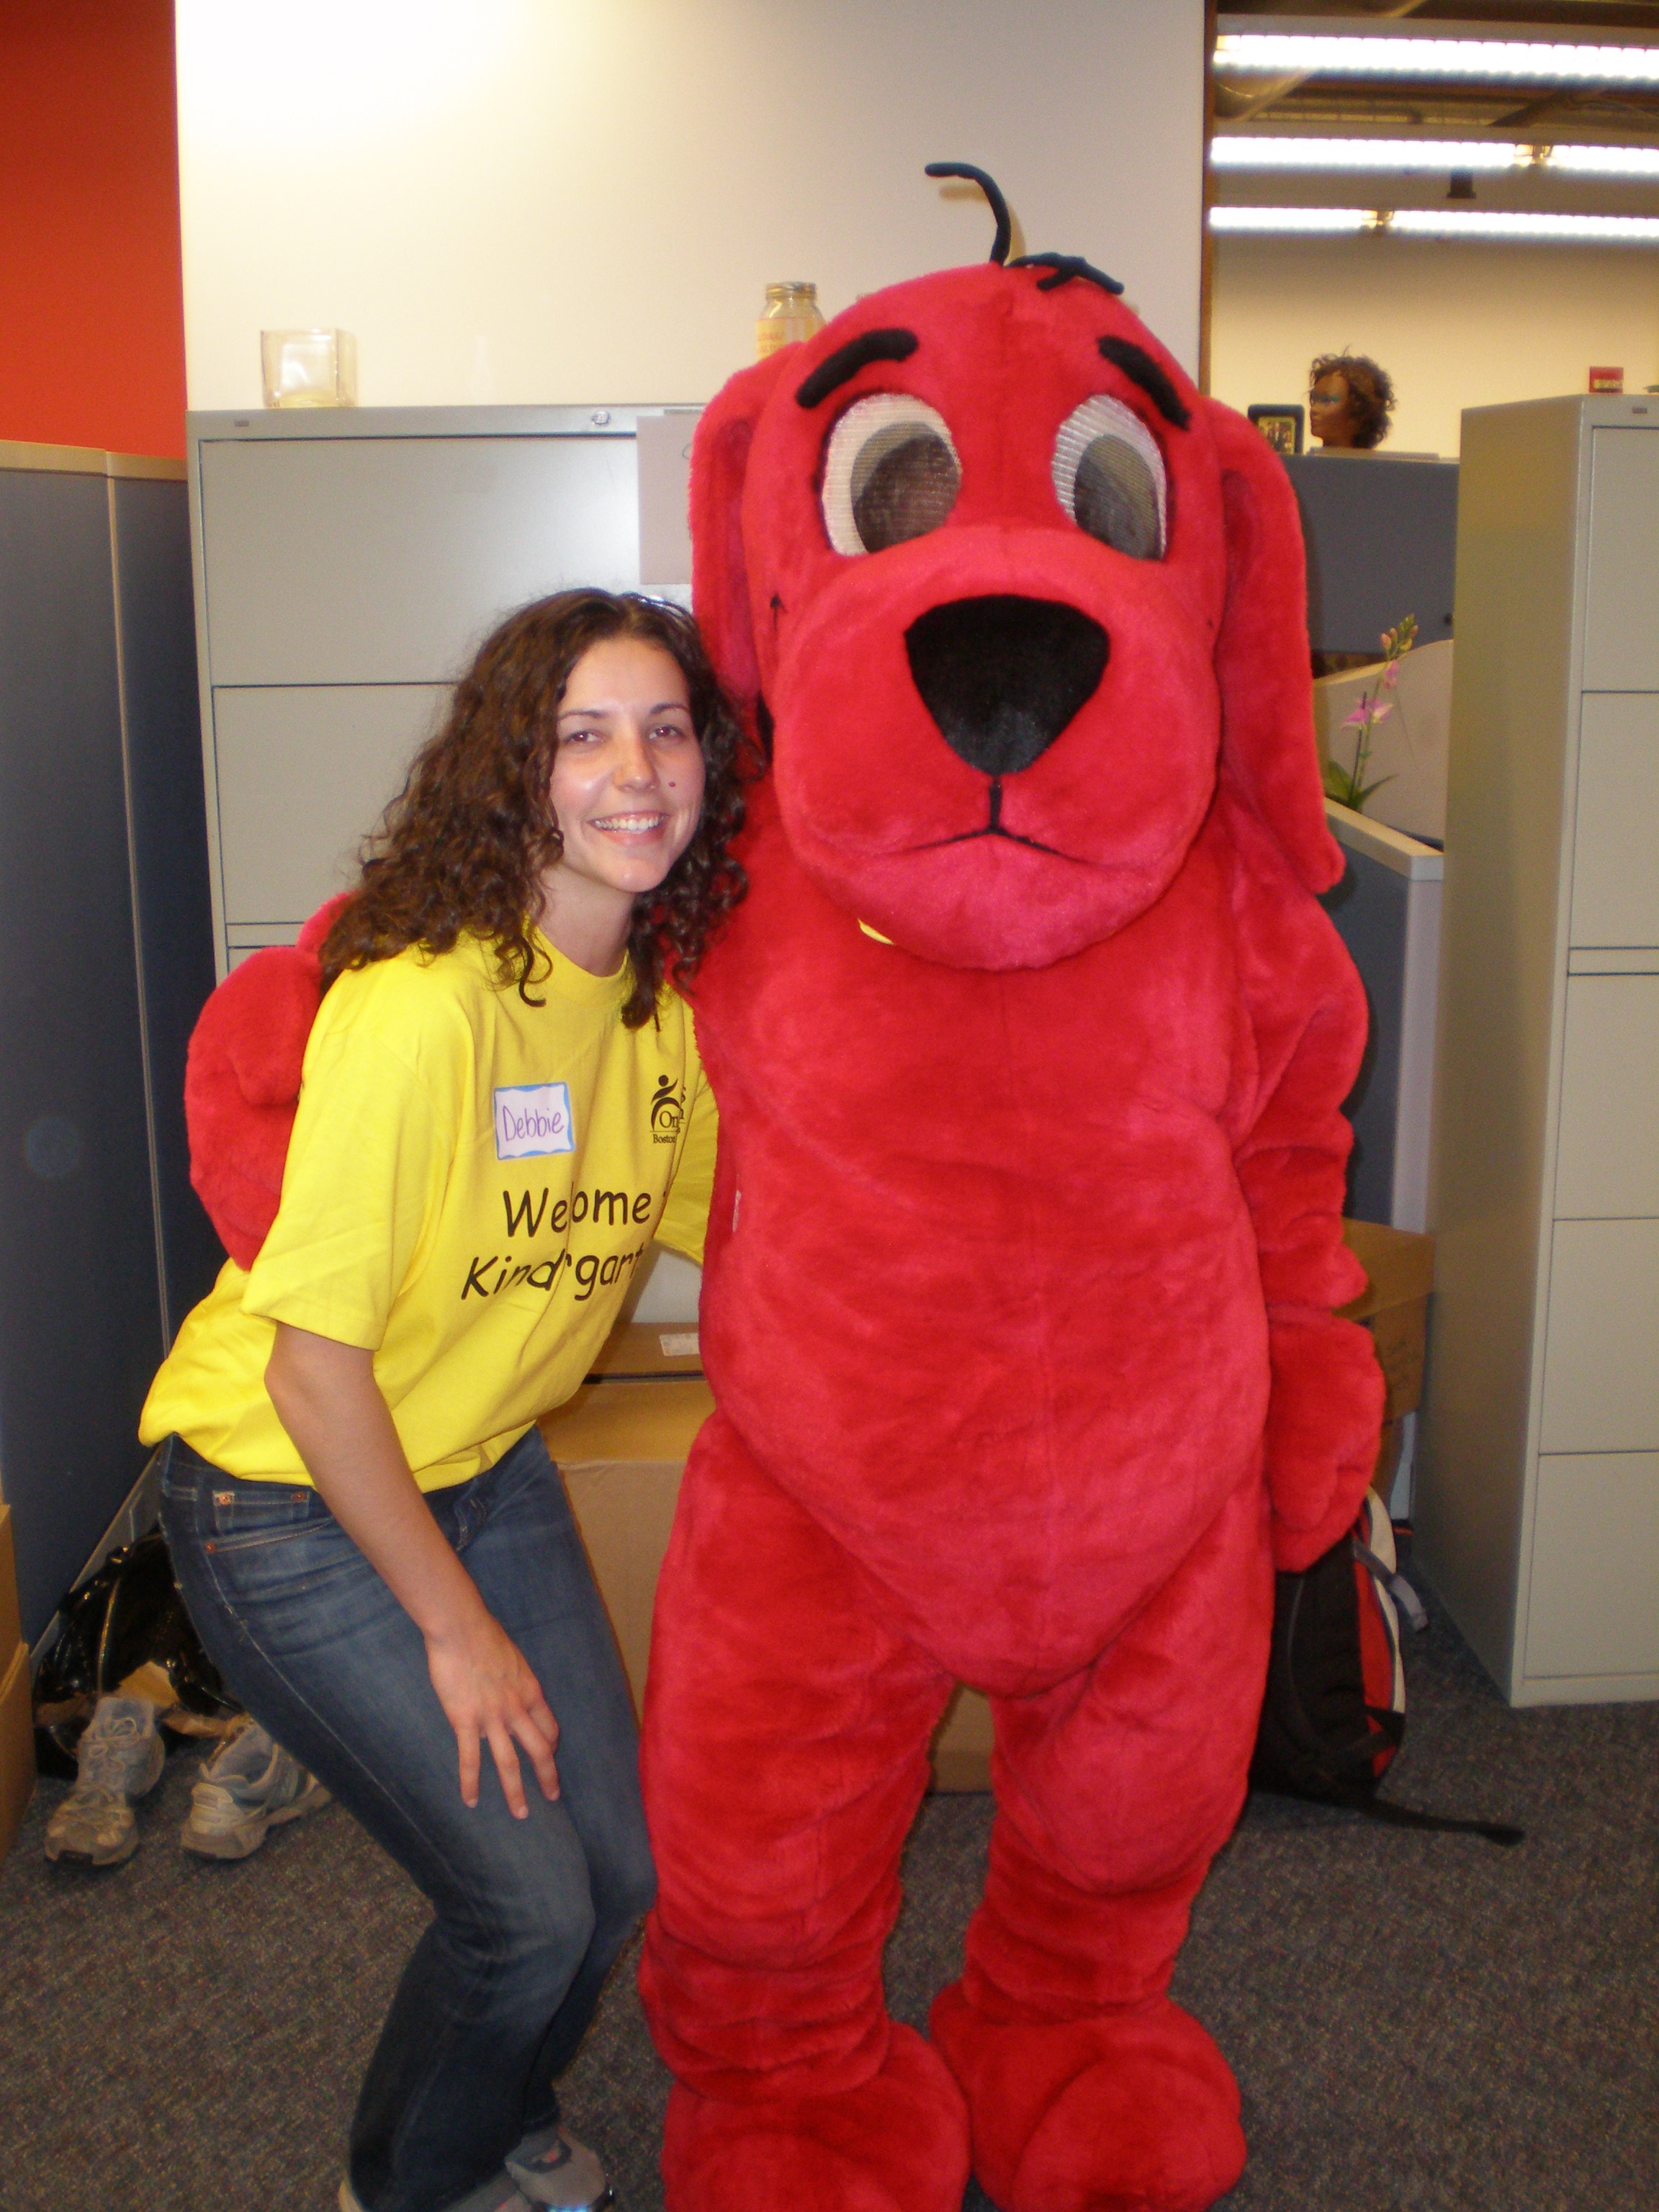 One more picture of Debbie and I. Yes, I was Clifford. That's a whole 'nother story.